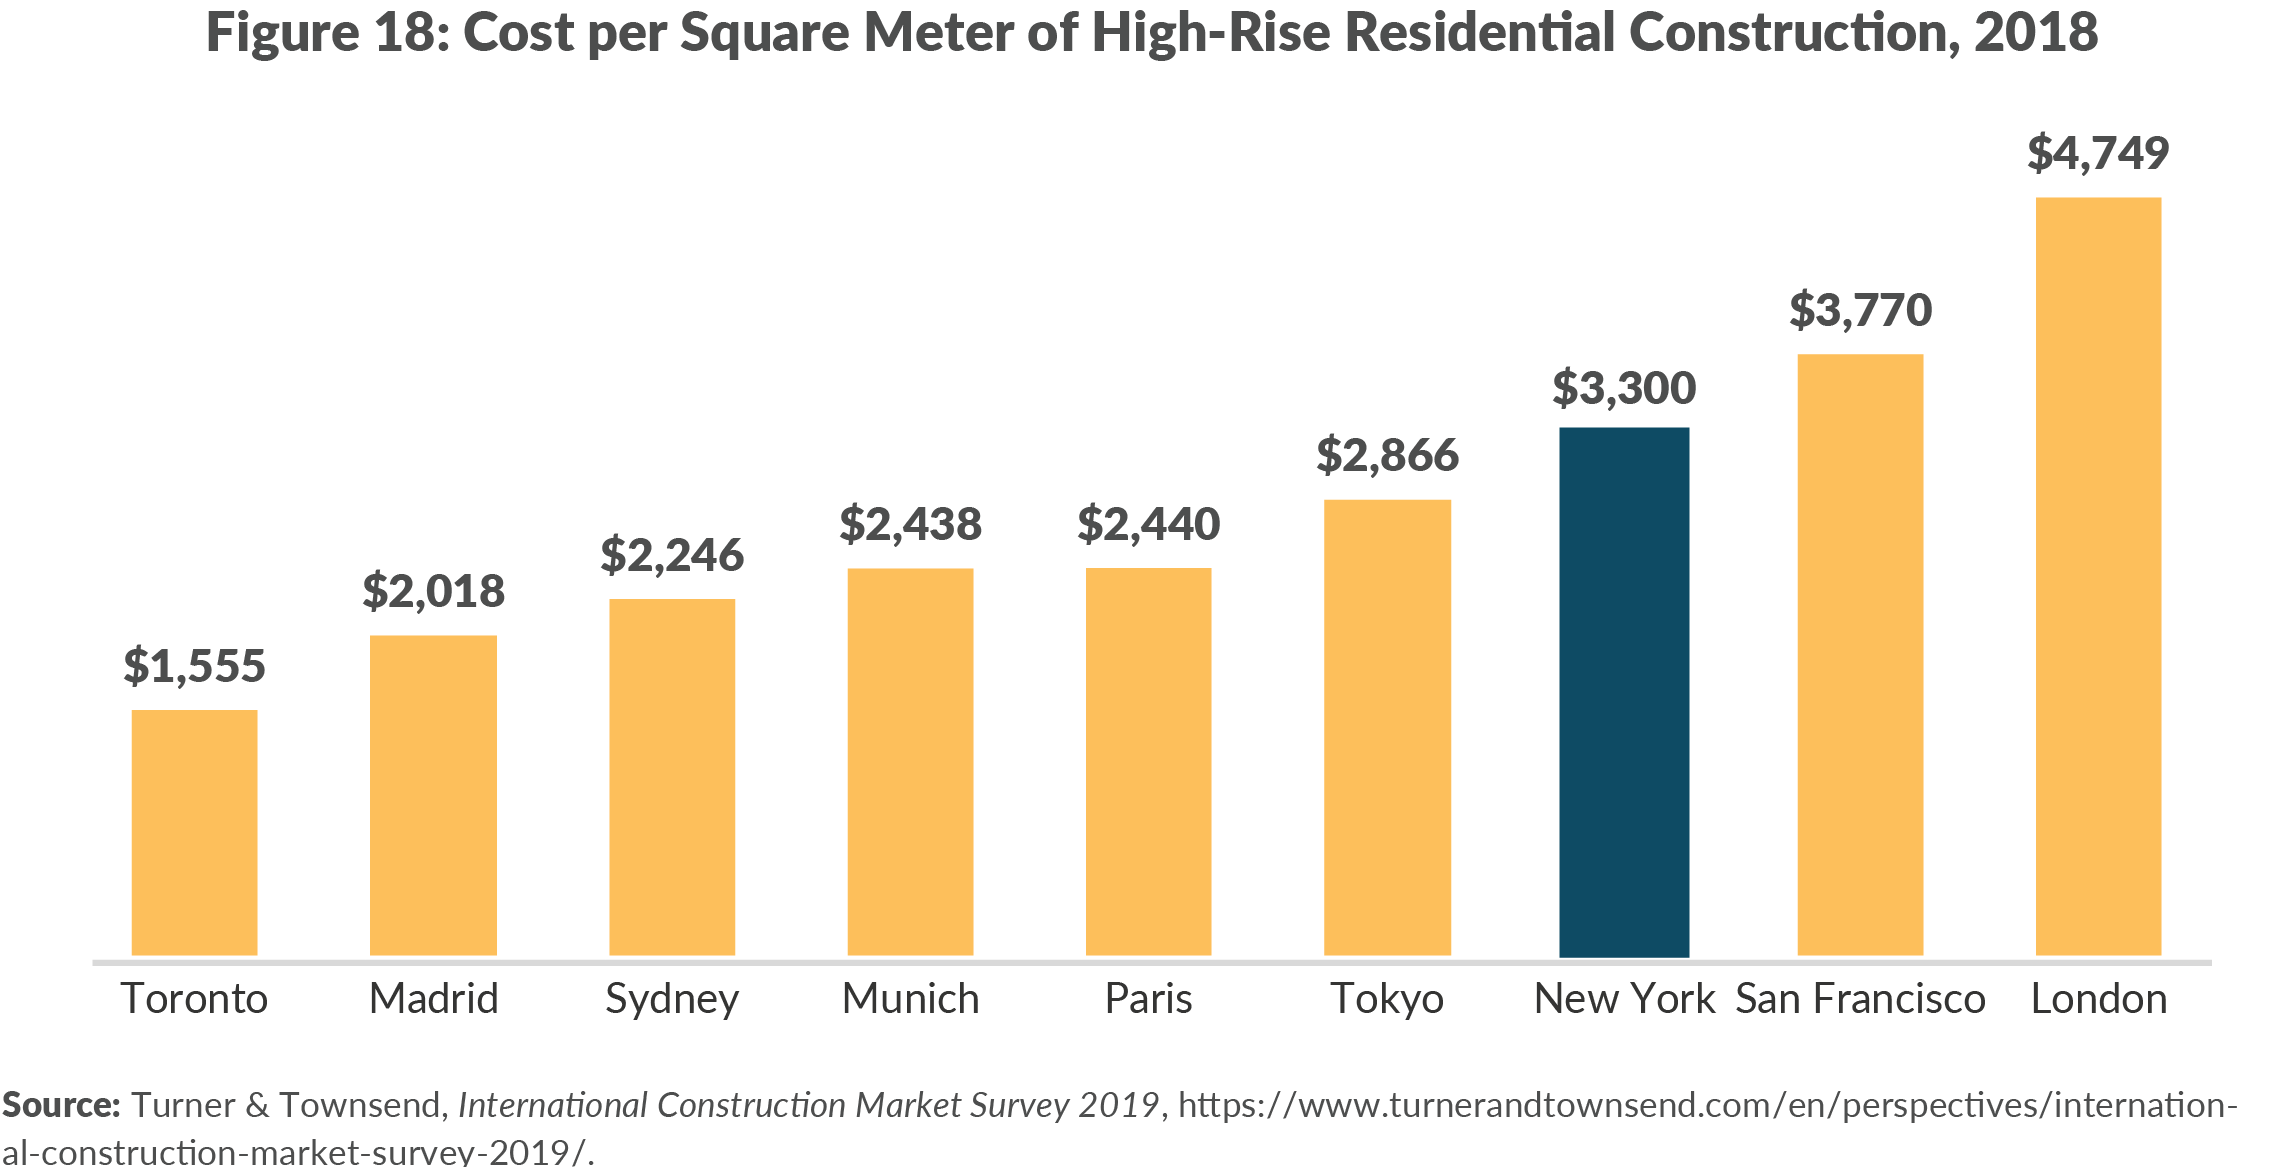 Figure 18. Cost per Square Meter of High-Rise Residential Construction, 2018